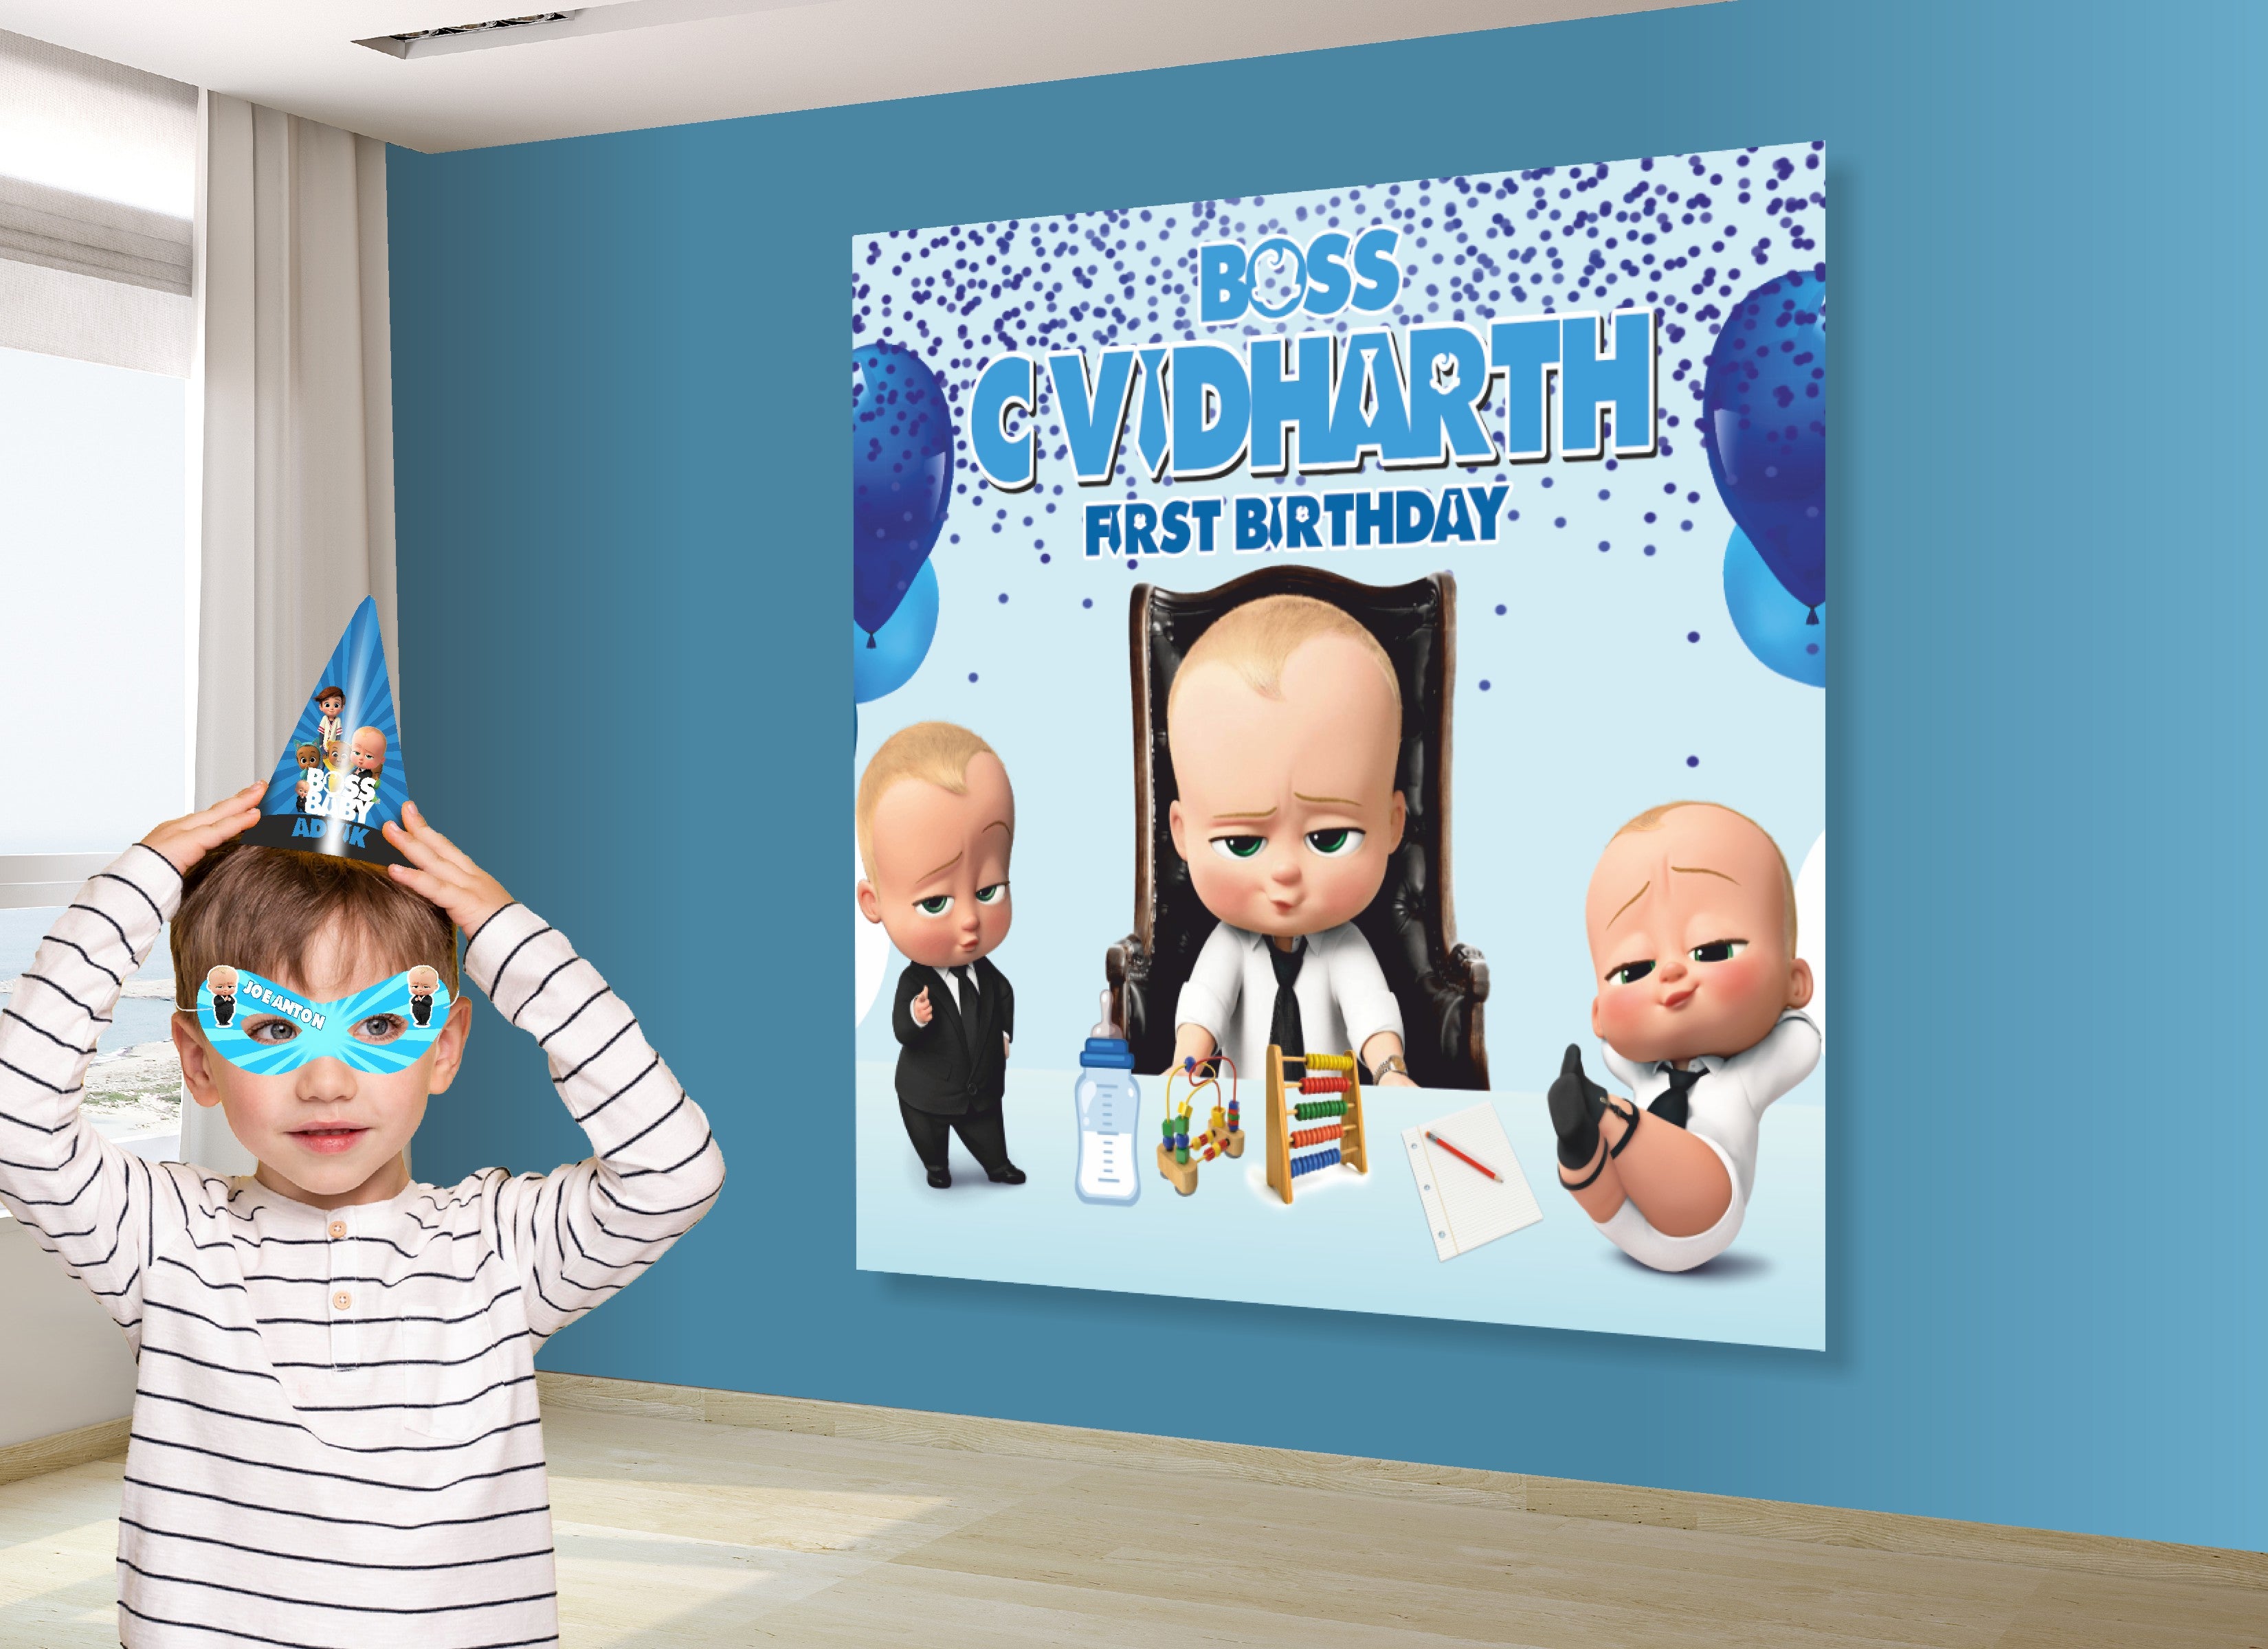 PSI Boss Baby Theme Customized Square Backdrop